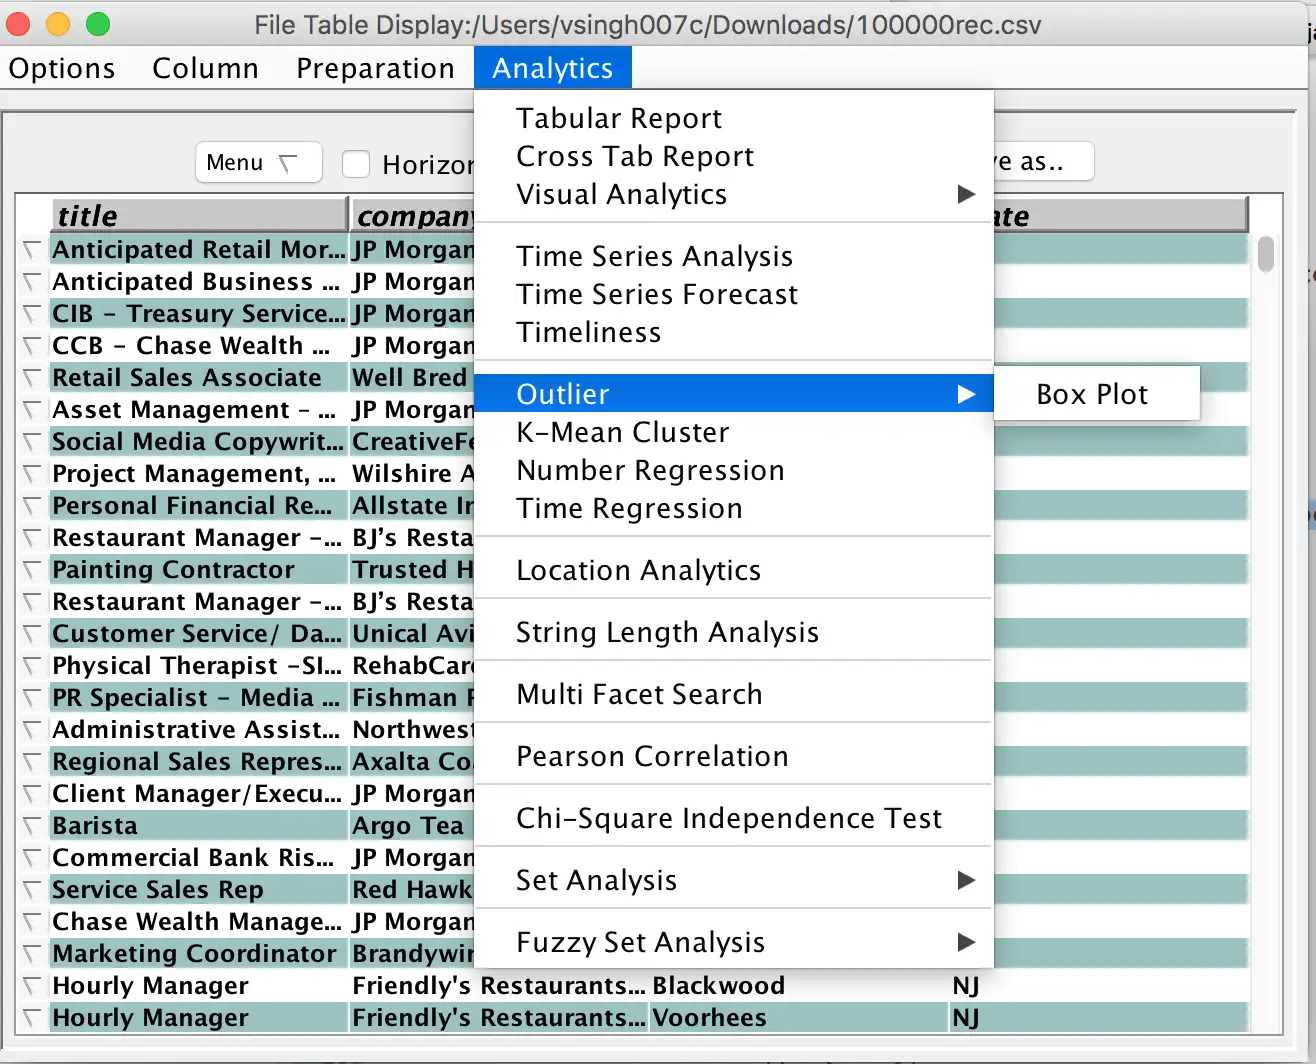 Download web tool or web app Open Source Data Quality and Profiling